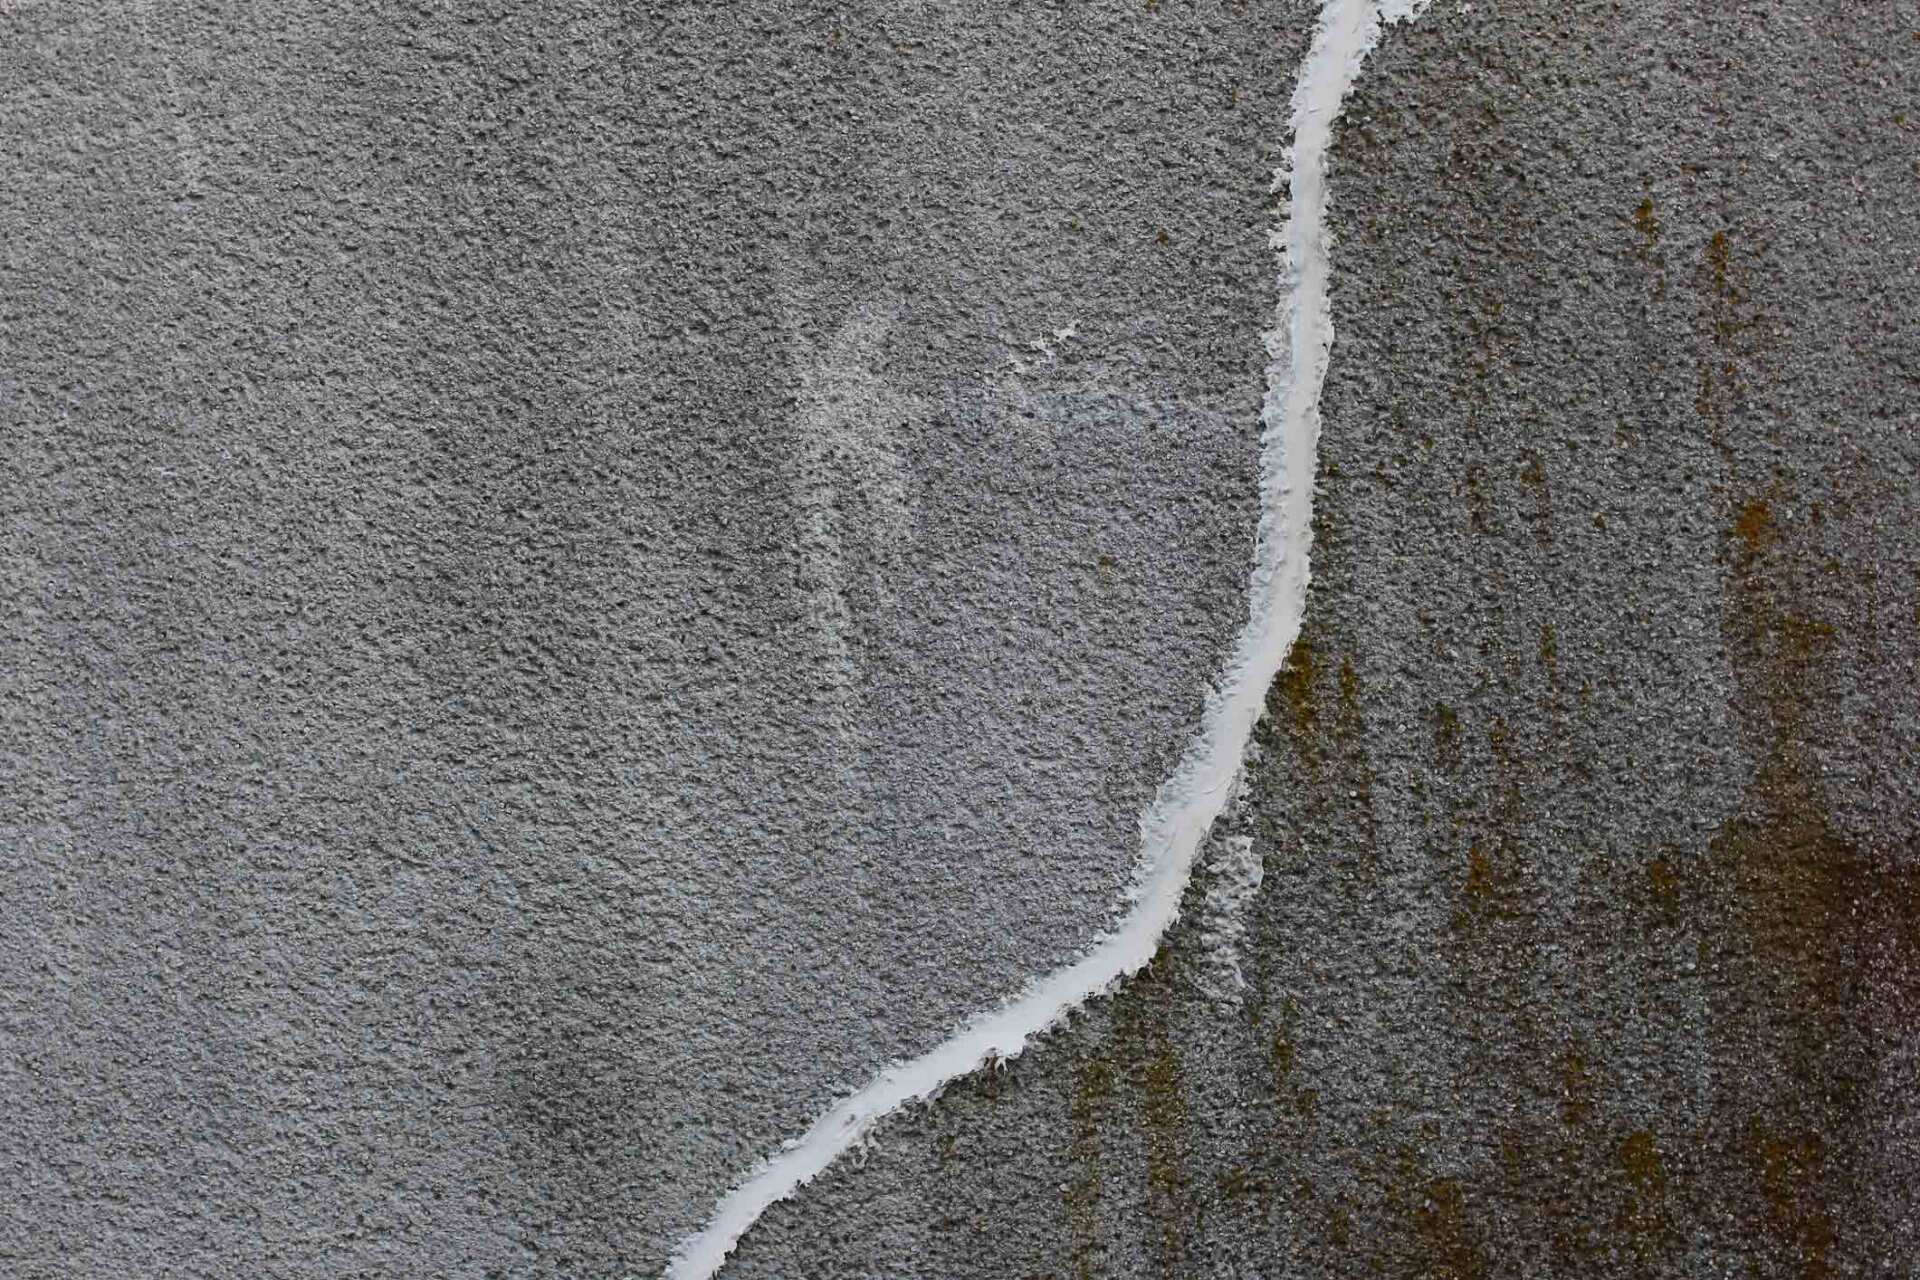 Concrete Wall With Crack Repaired With White Concrete Patching Putty - Warren, MI - Maple Lane Pest Control